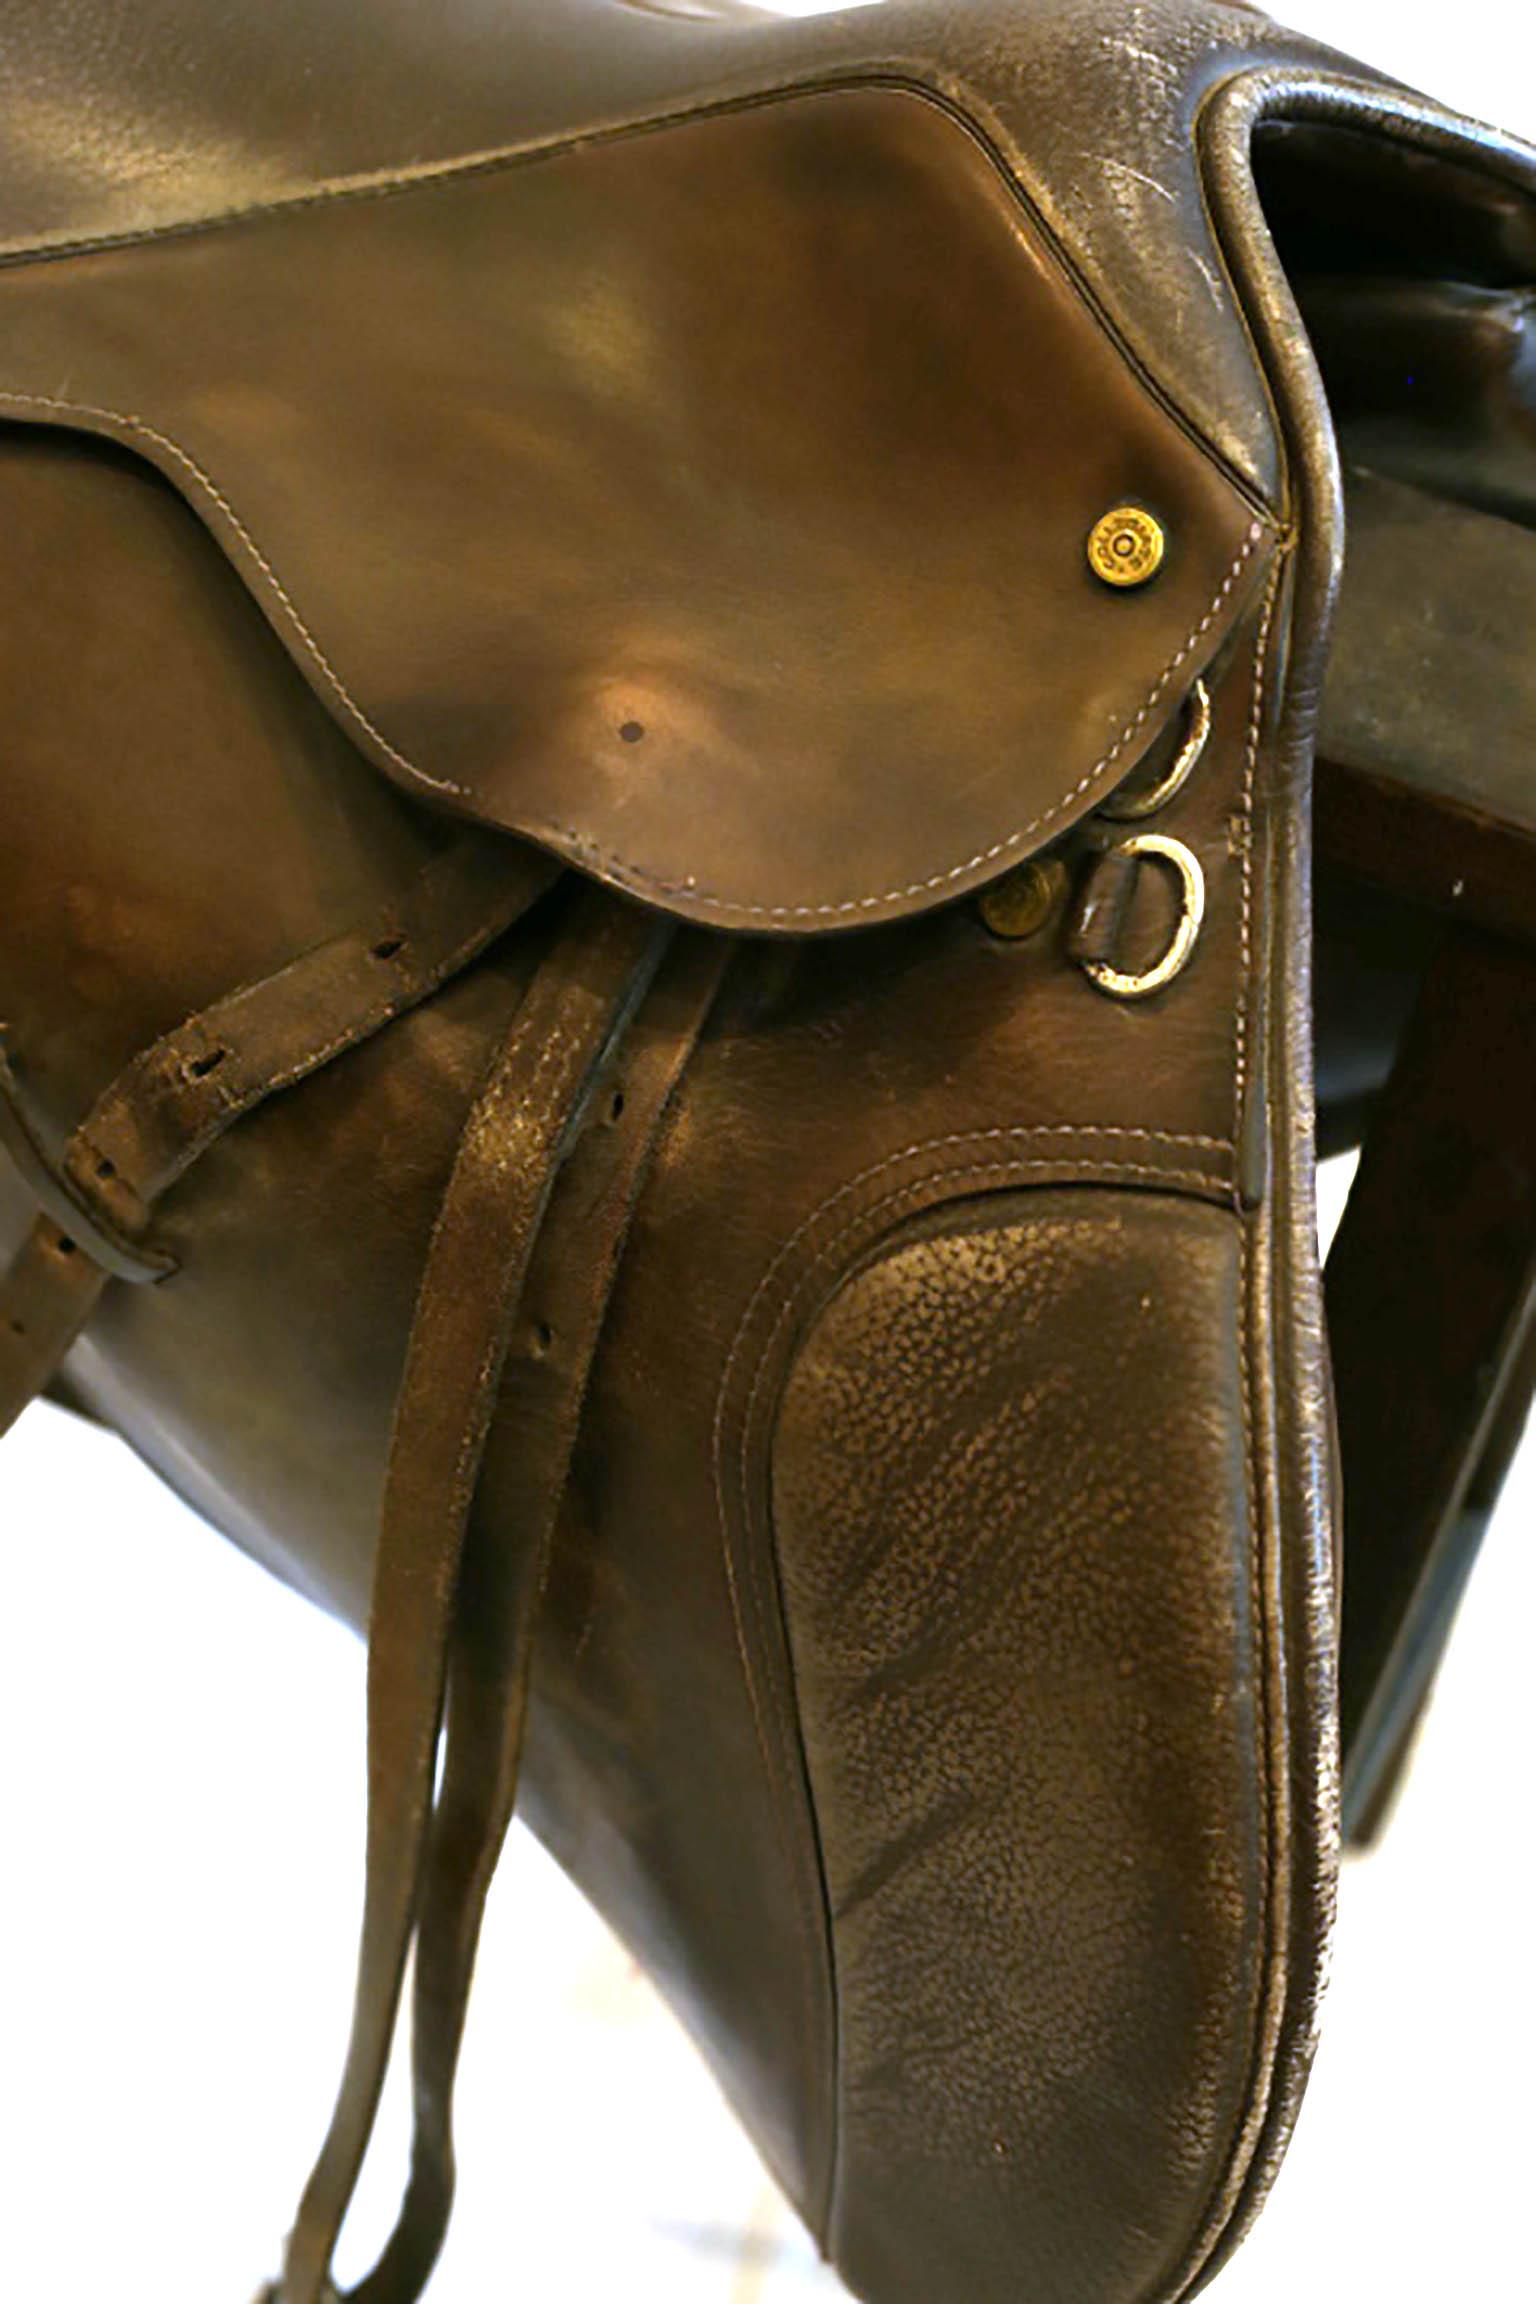 Beautiful English riding saddle with metal stirrups by Collegiate and small wooden sawhorse.